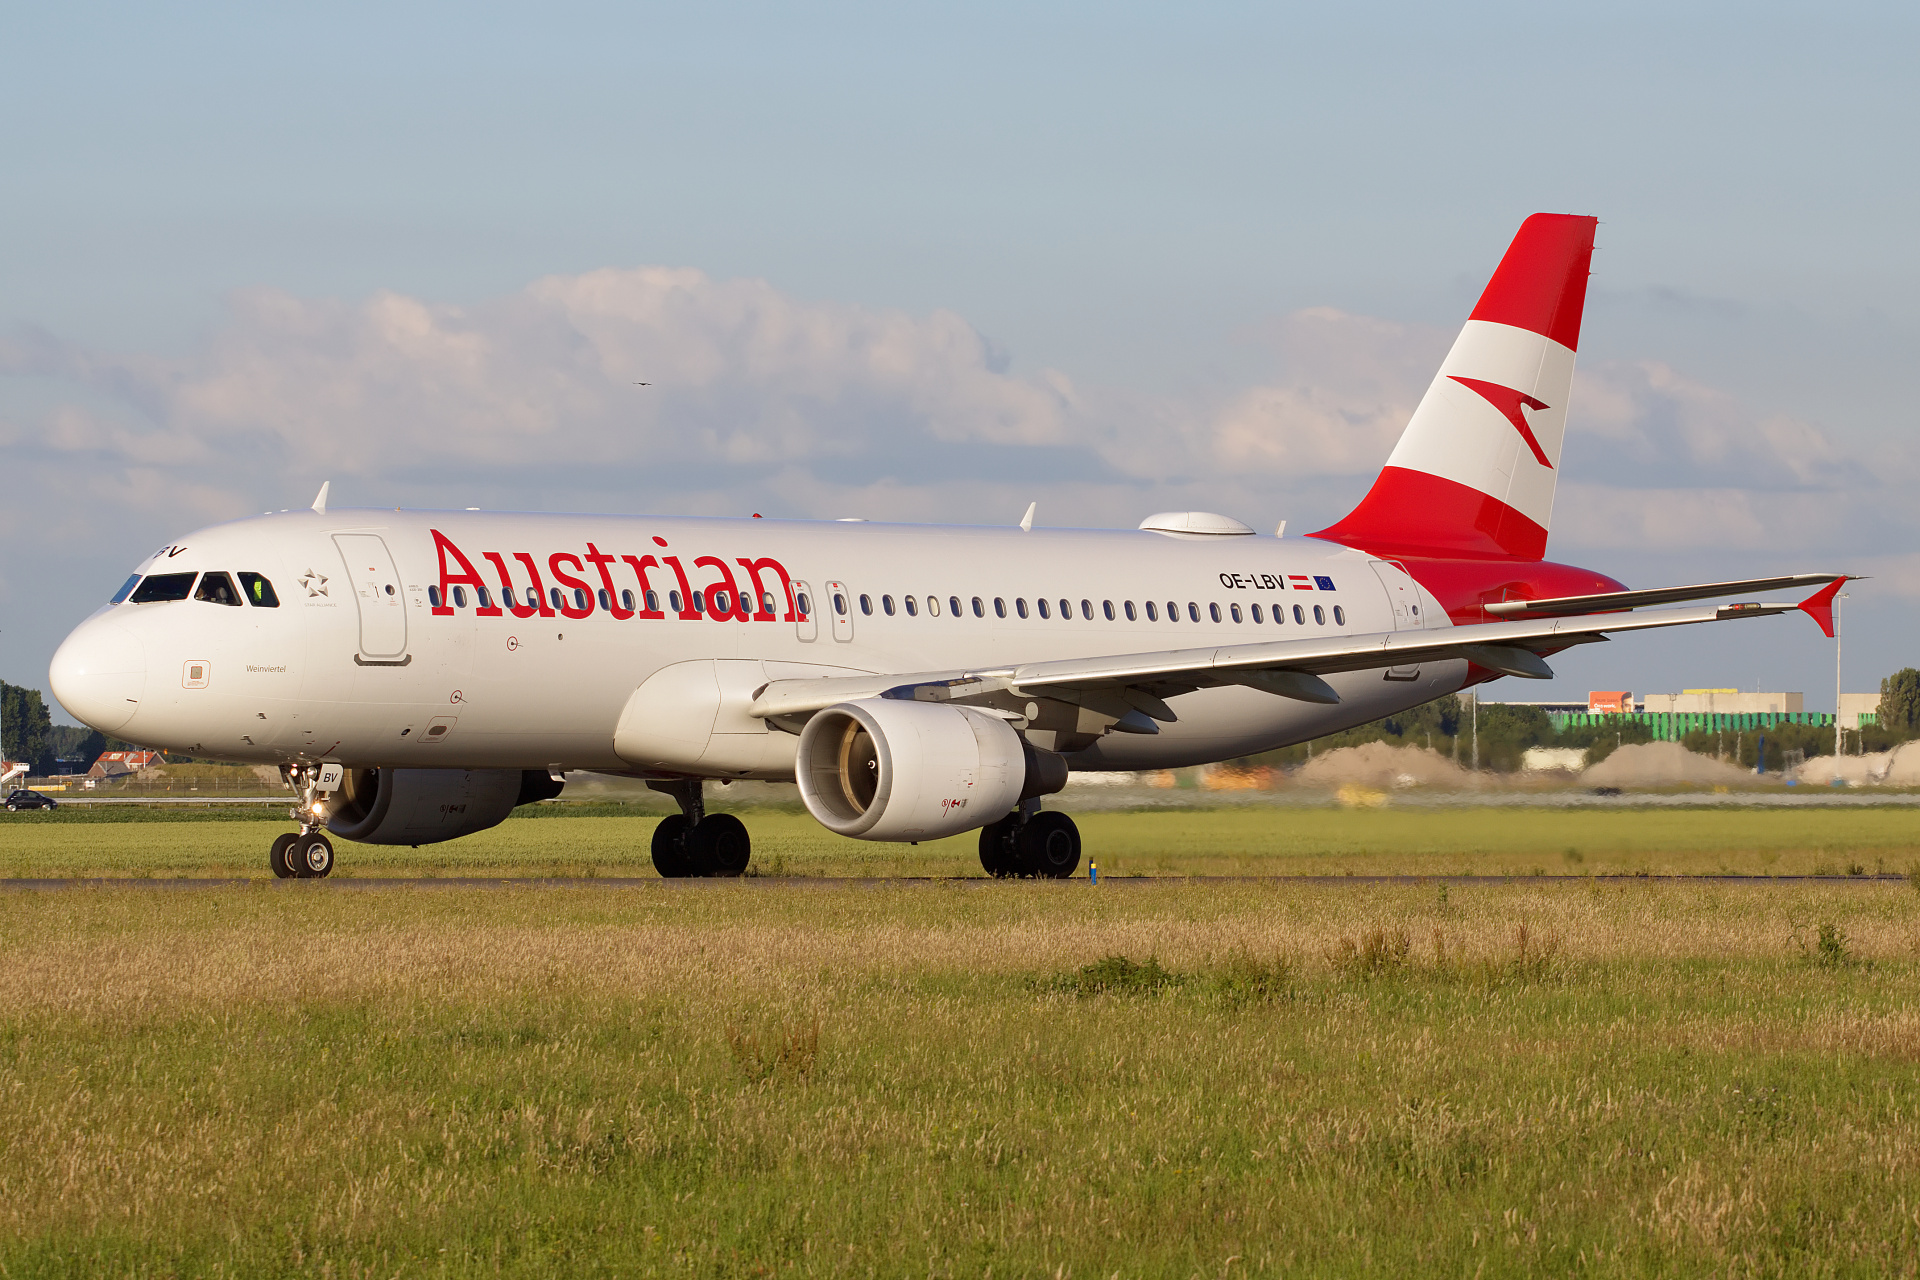 OE-LBV, Austrian Airlines (Samoloty » Spotting na Schiphol » Airbus A320-200)